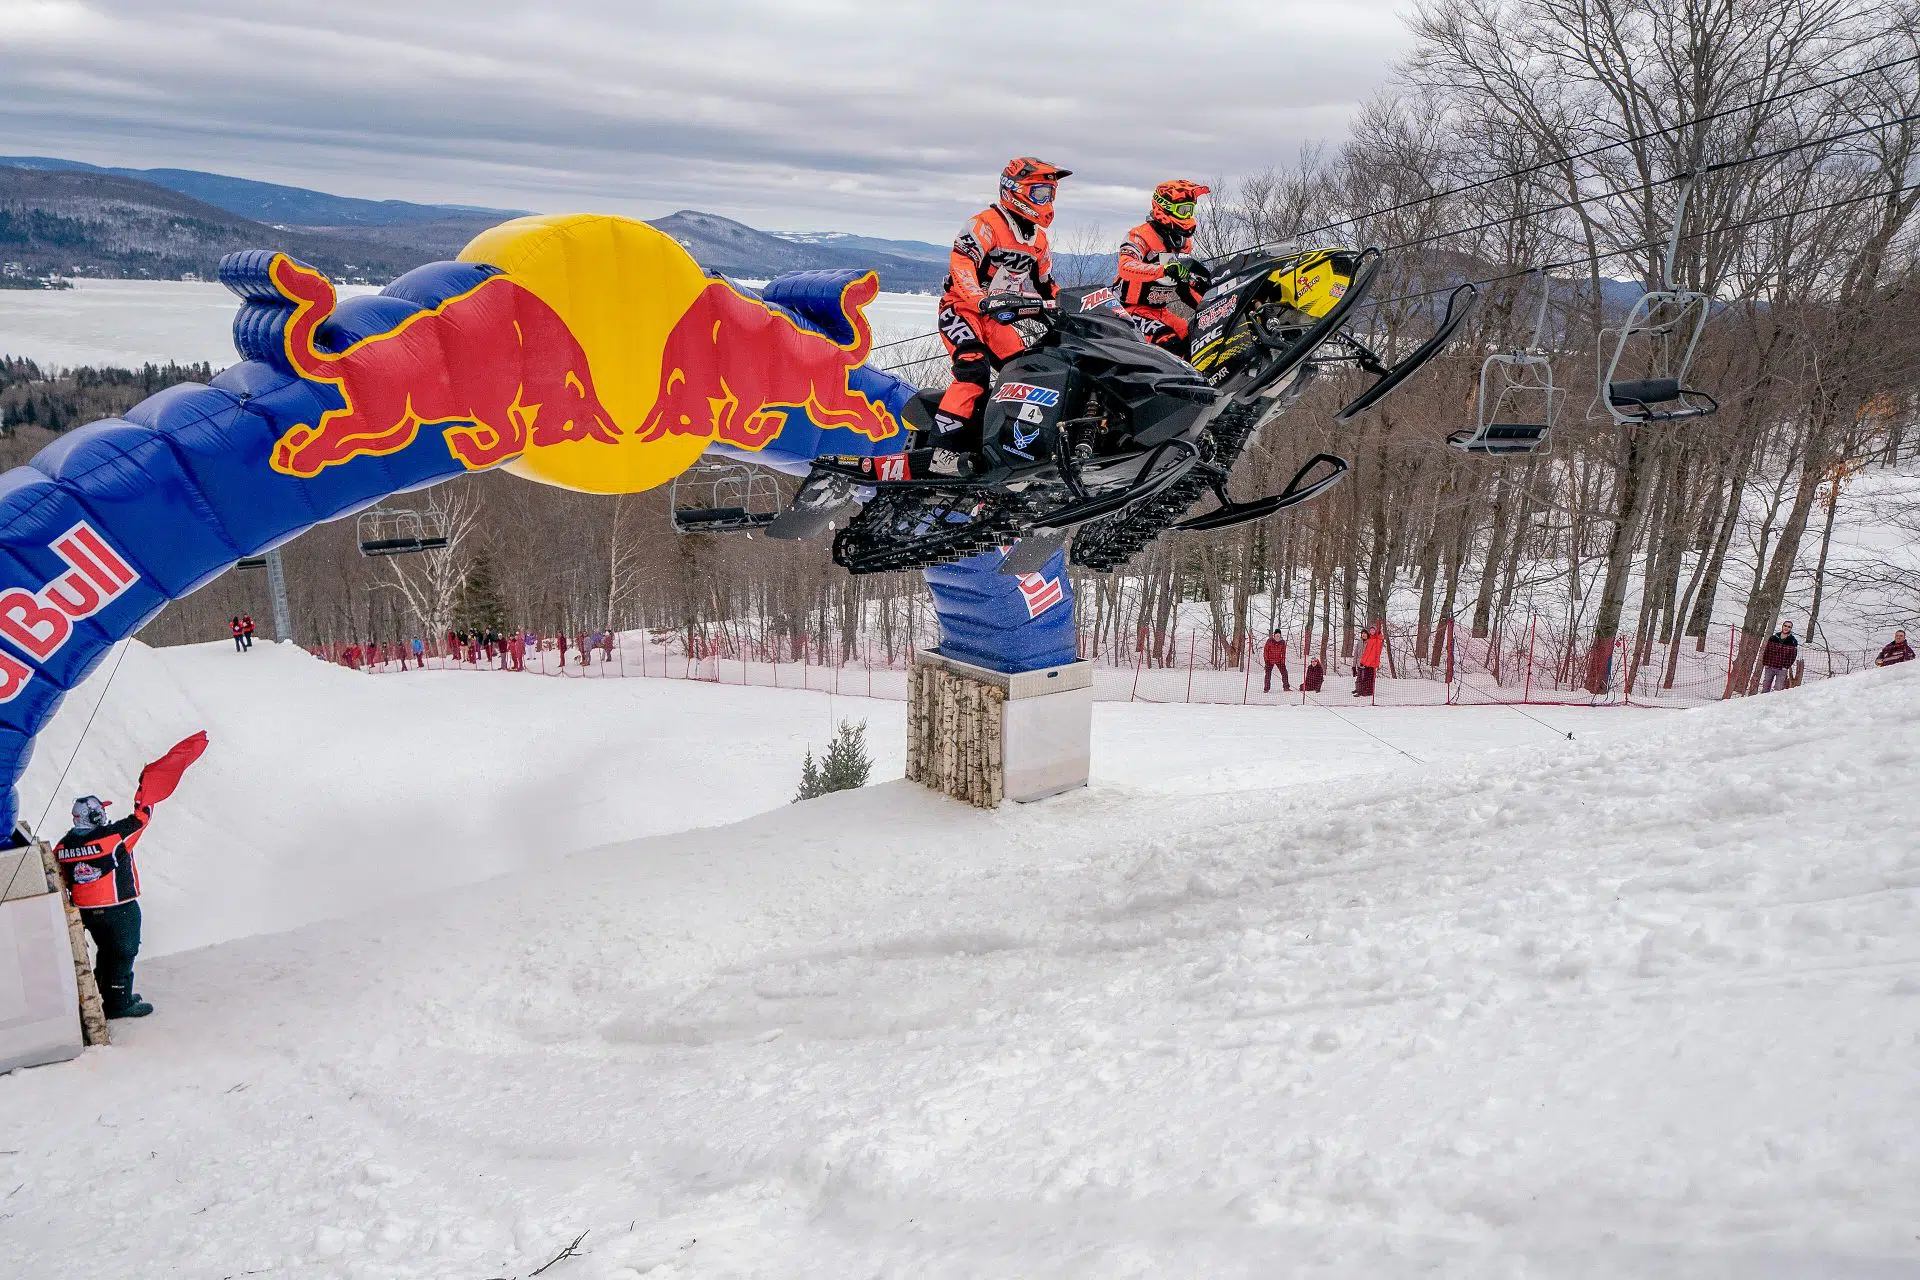 William St-Laurent, Keven Kelly Red Bull Sledhammers, 2019, Saint-Donat, Canada